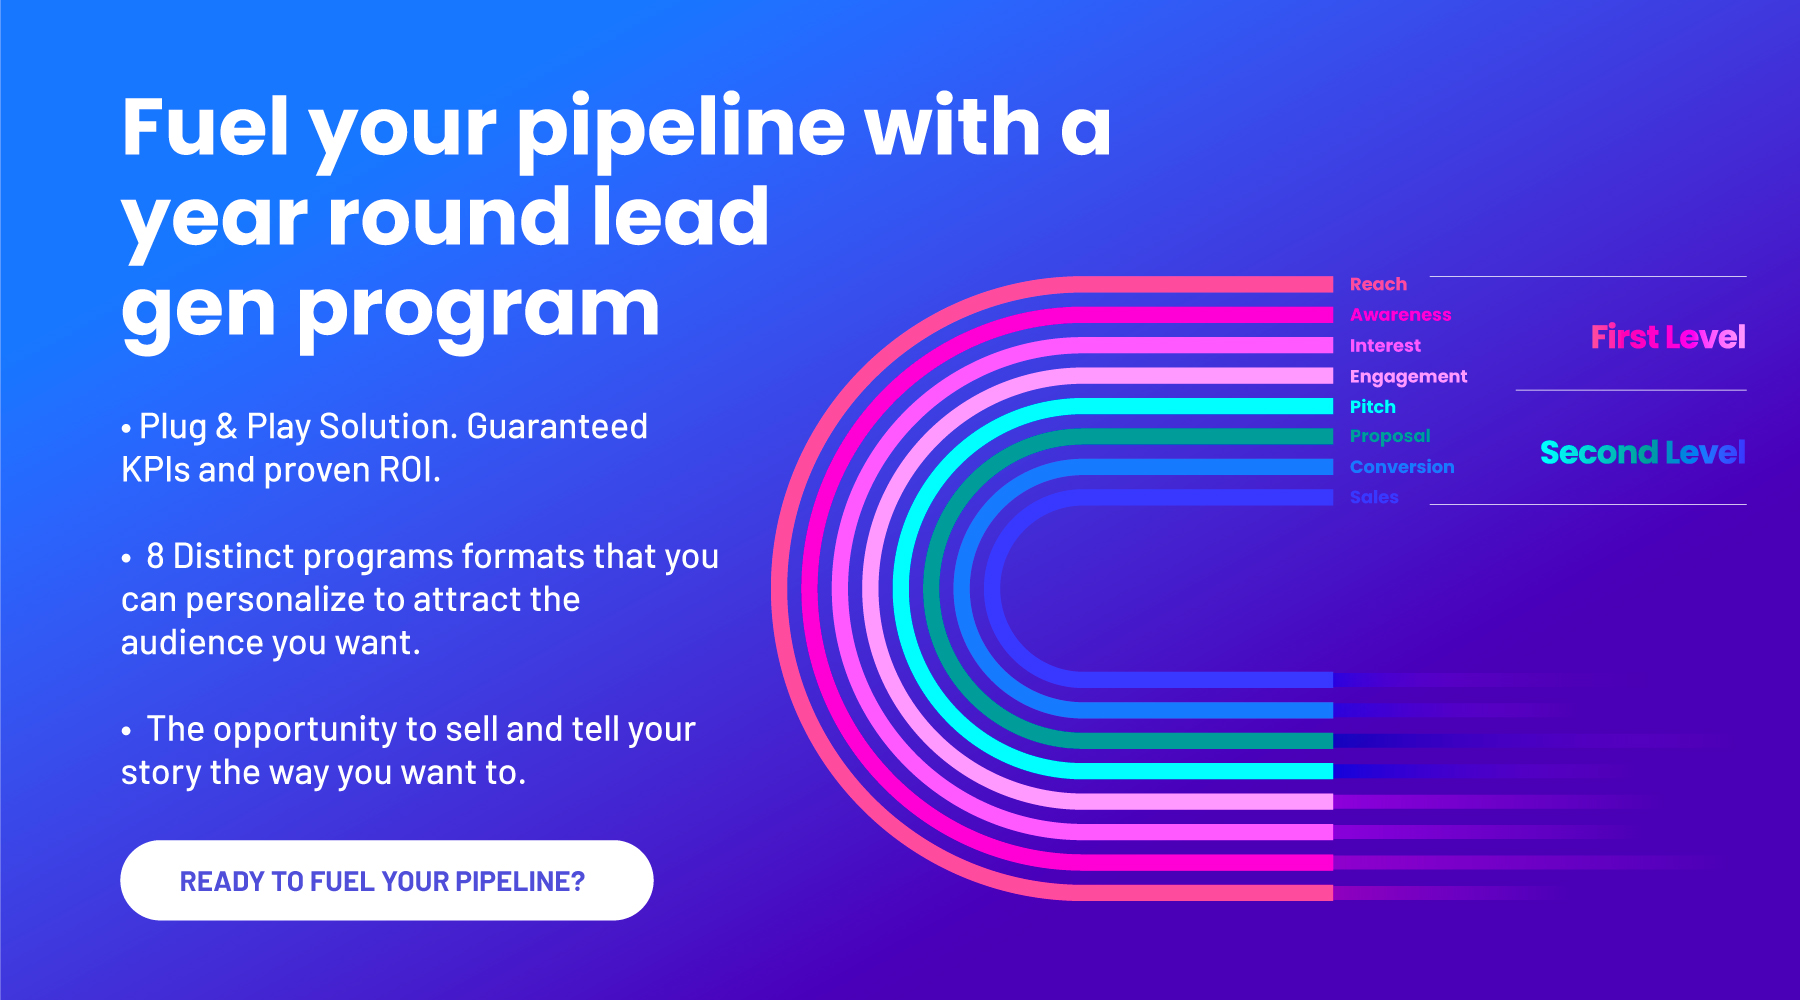 Fuel your pipeline with a year round lead gen program